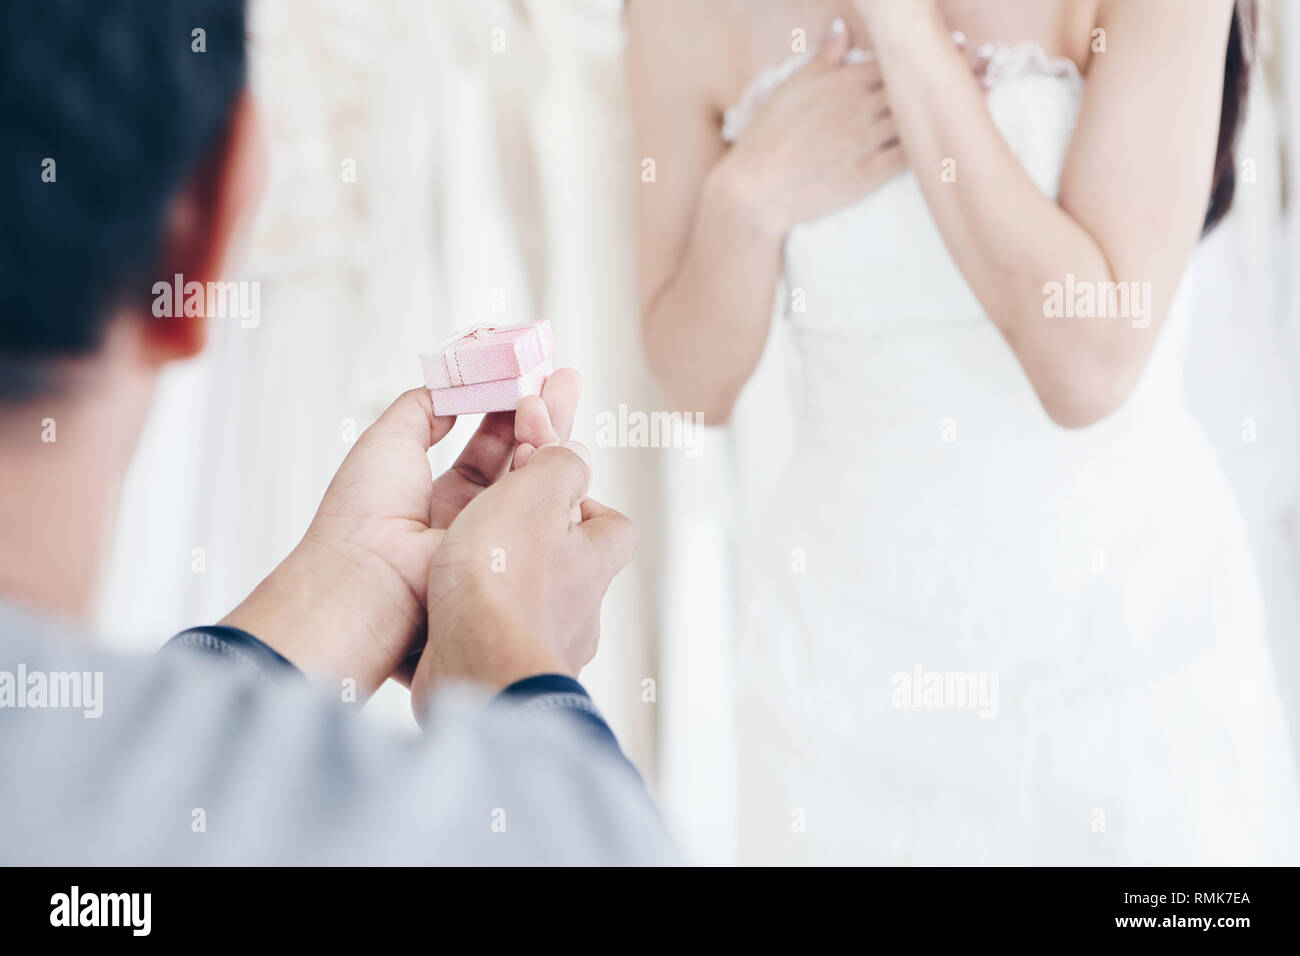 will you marry me cropped, young man giving ring to girlfriend propose wedding concept. Stock Photo